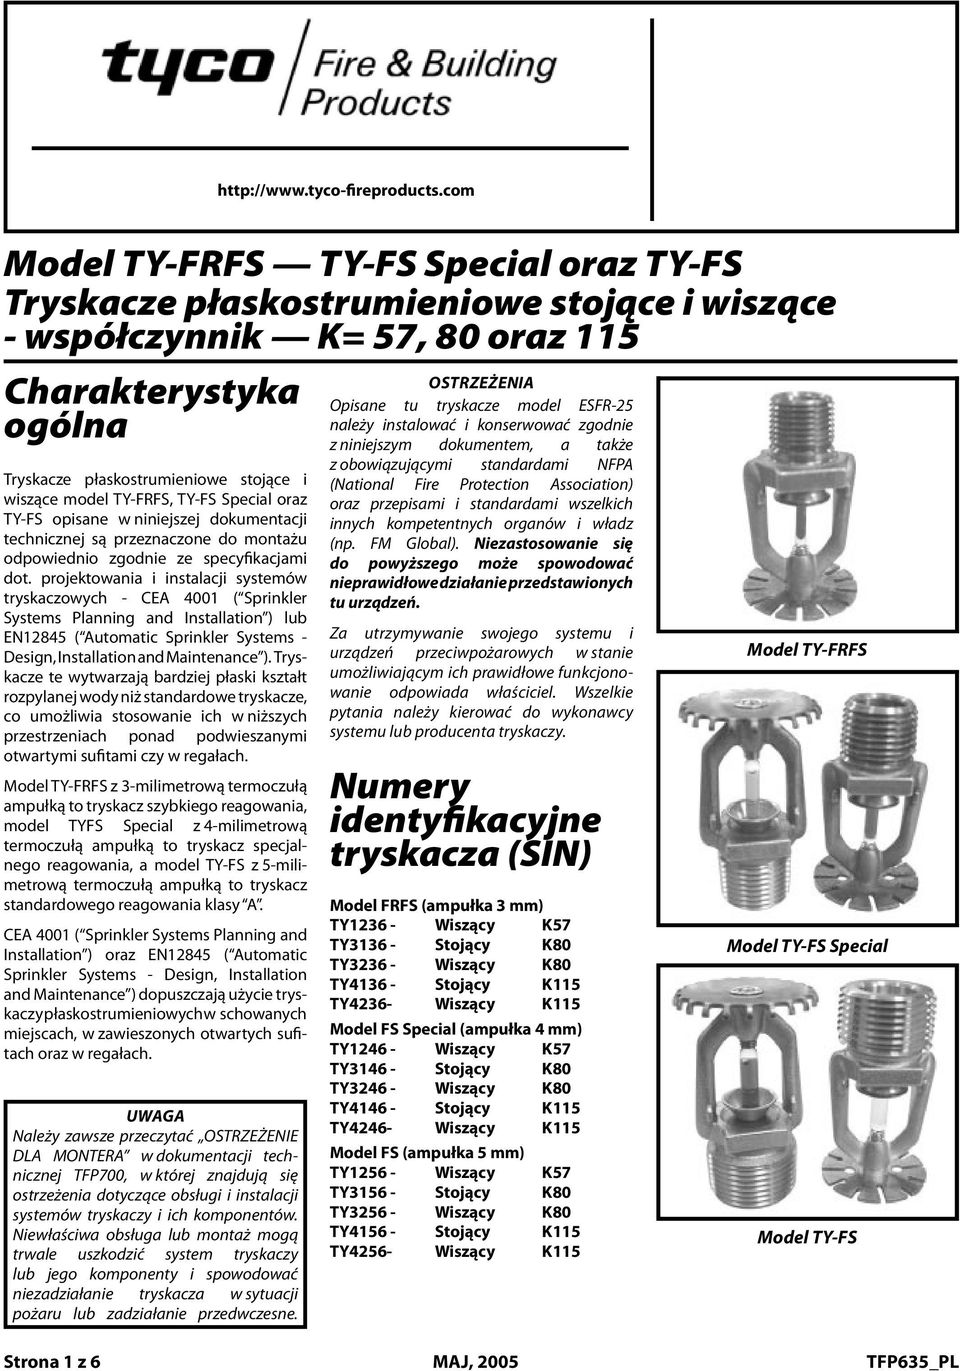 57, 8080, oraz and 115 115 K-factor Charakterystyka tained in compliance OSTRZEŻENIA with this document, Opisane as well tu tryskacze as with the model applicable ESFR-25 General standards ogólna